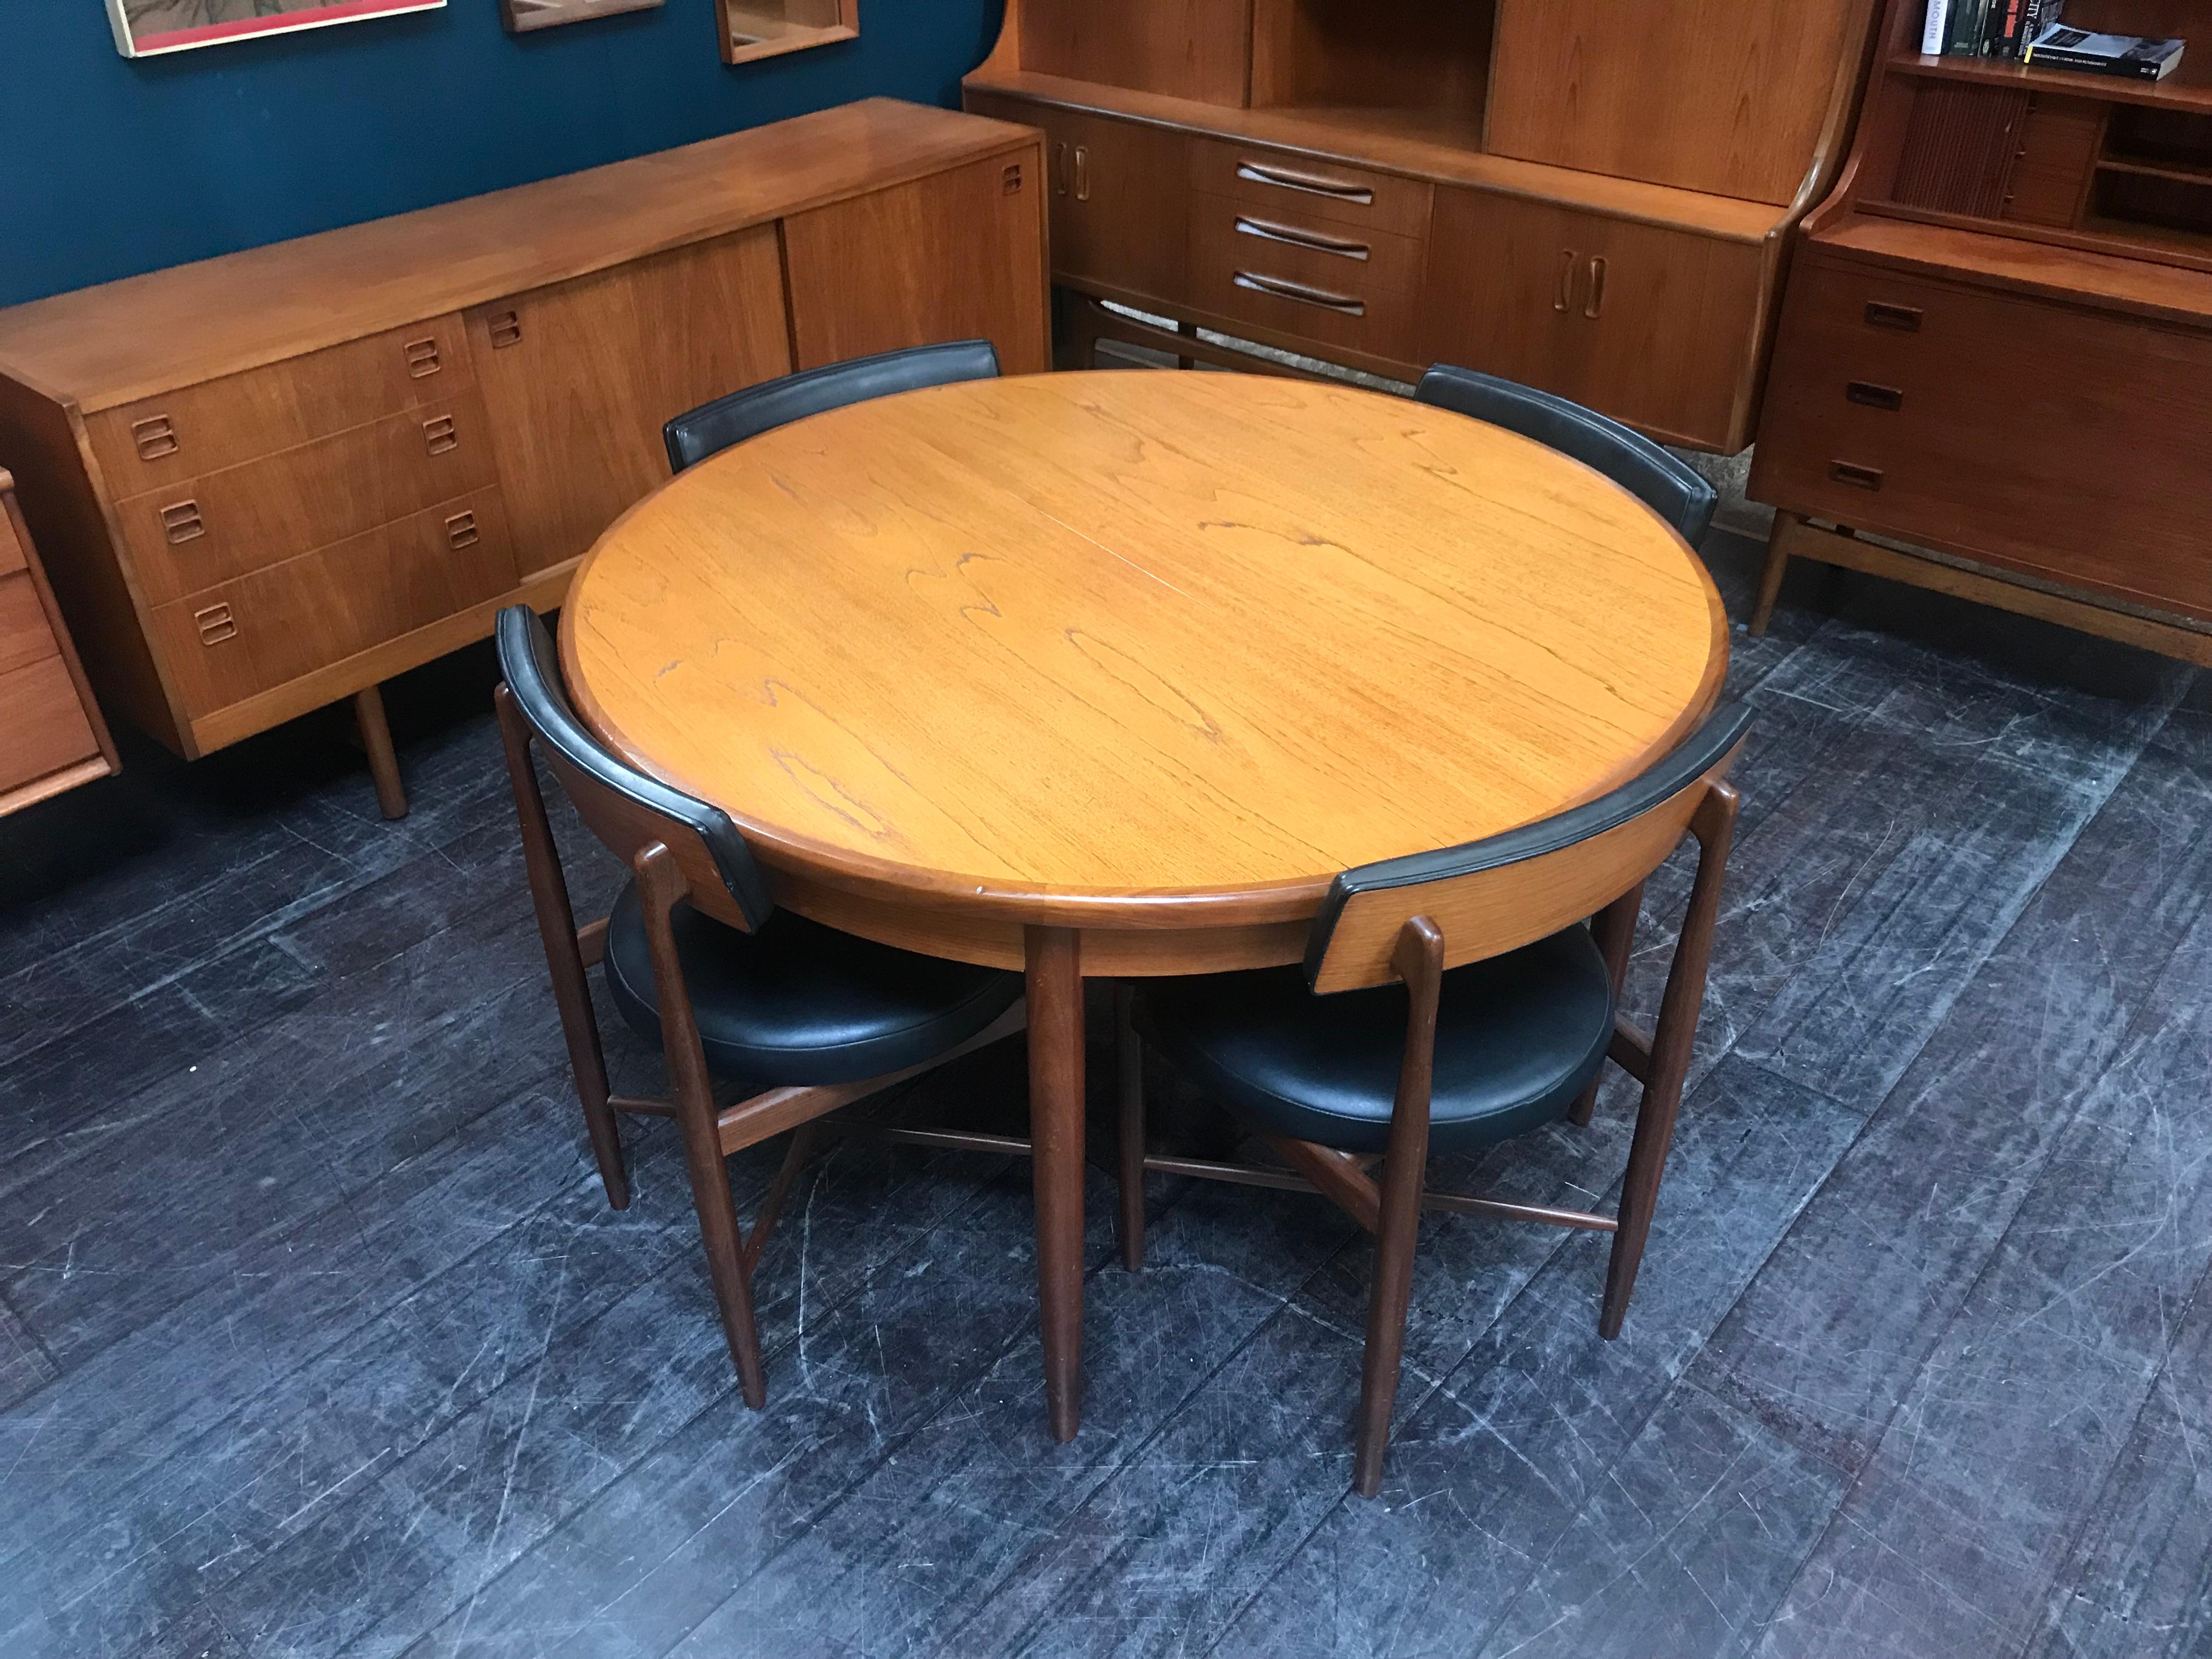 Mid-Century Modern British Midcentury Teak Dining Table G Plan with 4 Chairs by Ib Kofod-Larsen For Sale